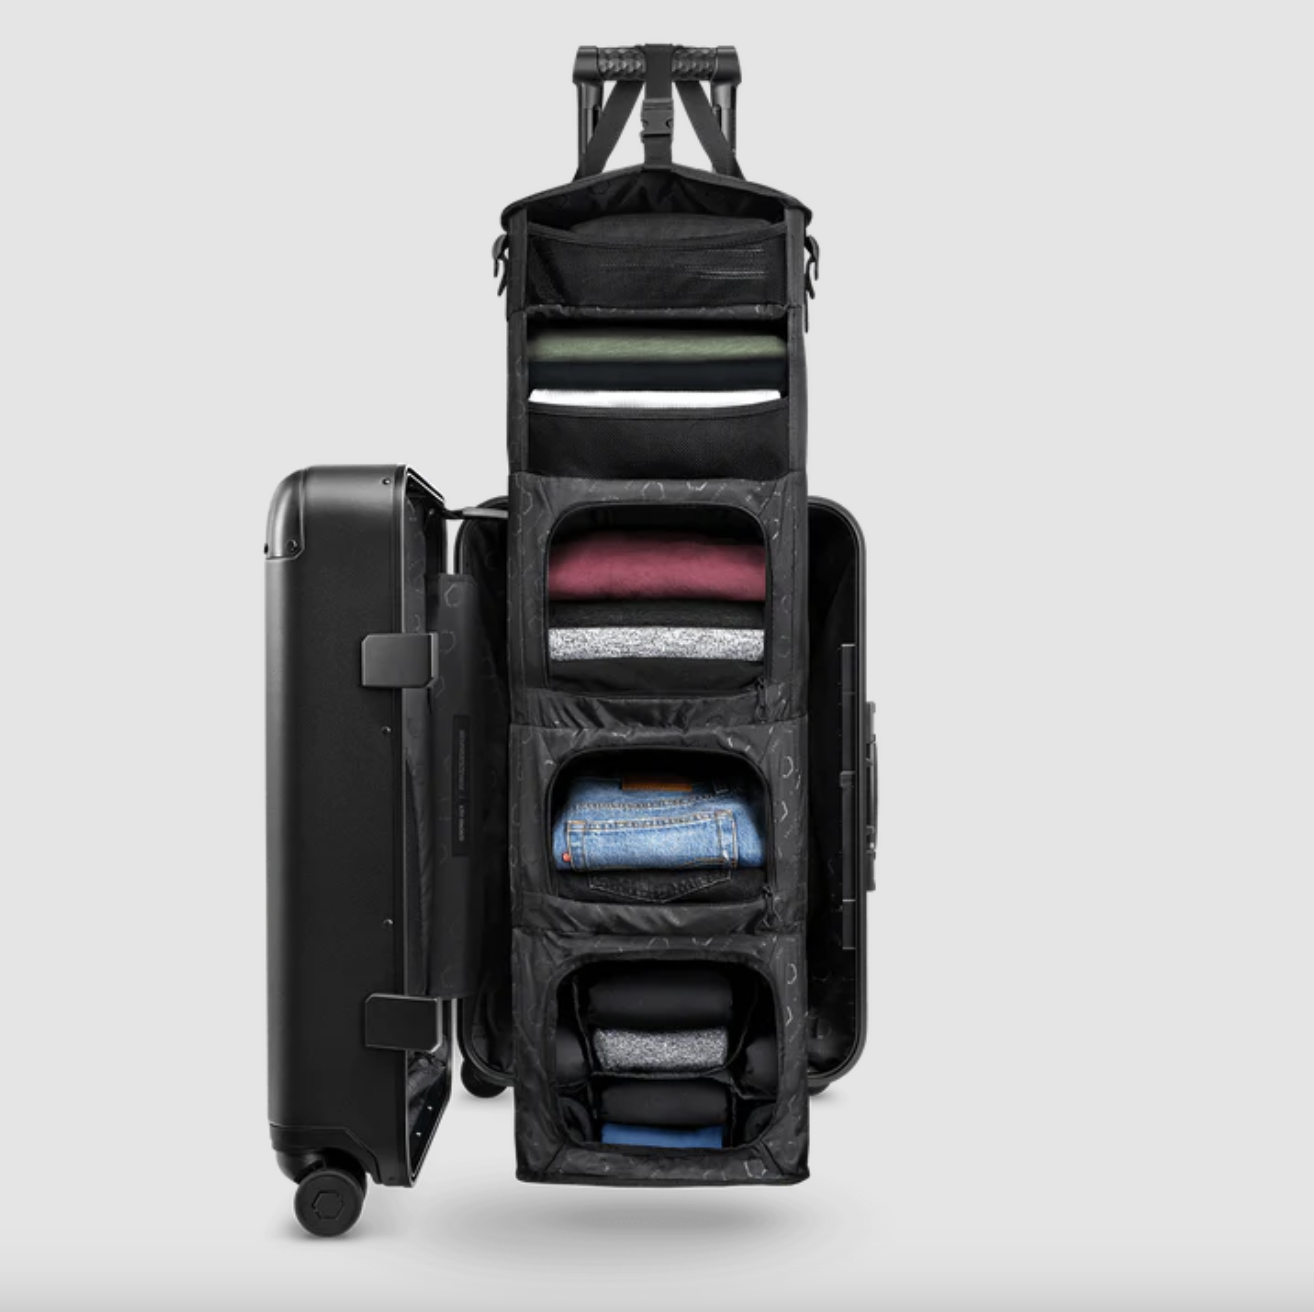 <p><strong>$275.00</strong></p><p>Solgaard's expanding closet-style spinners are the biggest innovation in carry-on luggage since Away introduced its integrated Li-ion battery back in 2015. Heck, even <em>Time</em> magazine named Solgaard bags one of its <a href="https://time.com/collection/best-inventions-2018/5455672/the-carry-on-closet/">Best Inventions of 2018</a>. The built-in shelving system allows you to organize outfits rather than just toss in a pile of clothes, letting you dial in various looks for particular events and arrive with everything you might need. </p><p>The <strong>Carry-On Closet</strong> is constructed with a tough polycarbonate shell and an aluminum frame and features an integrated USB charging port. Five internal shelves compress when the suitcase is closed, keeping your clothes neat during travel. When you arrive, just open it up and let your travel closet expand. The interior lining is made from 100% recycled ocean-bound plastic. </p><a class="body-btn-link" href="https://www.amazon.com/solgaard-carry-closet-luggage/s?k=solgaard+carry+on+closet+luggage&tag=syndication-20&ascsubtag=%5Bartid%7C10064.g.44130437%5Bsrc%7Cmsn-us">shop solgaard at amazon</a>